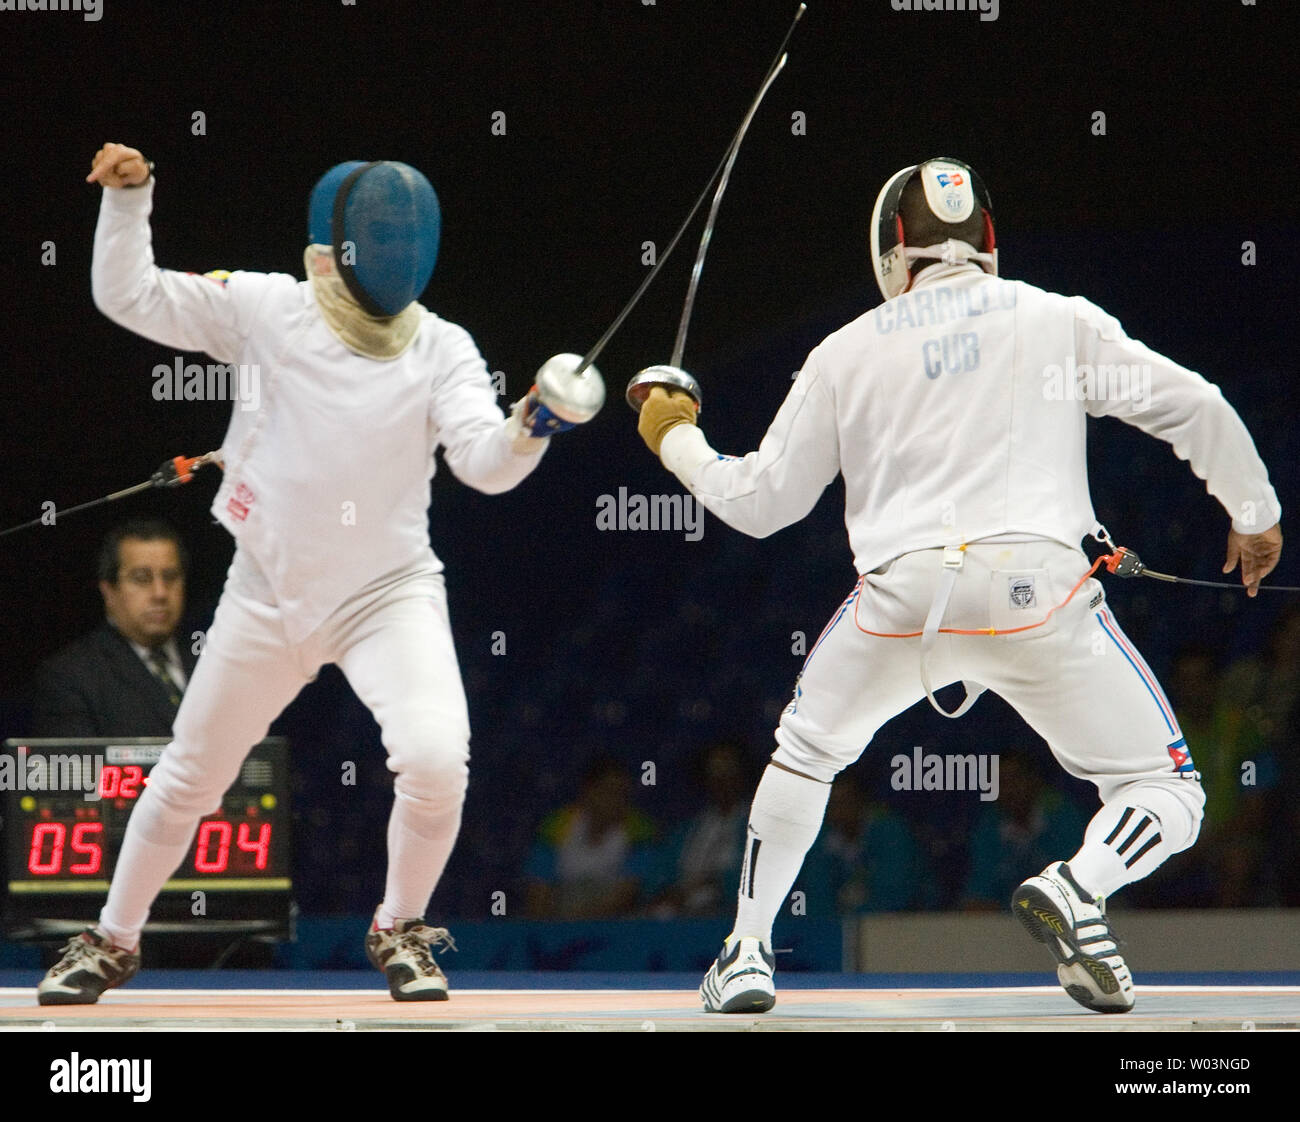 Venezuela's Reuben Limardo (L) locks blades with Cuba's Andres Carrillo in the gold medal match of men's individual epee at Riocentro during the 2007 Pan Am Games in Rio de Janeiro, Brazil on July 16, 2007. Limardo went on to win gold, beating Carrillo 11-10 in overtime.  (UPI Photo/Heinz Ruckemann) Stock Photo